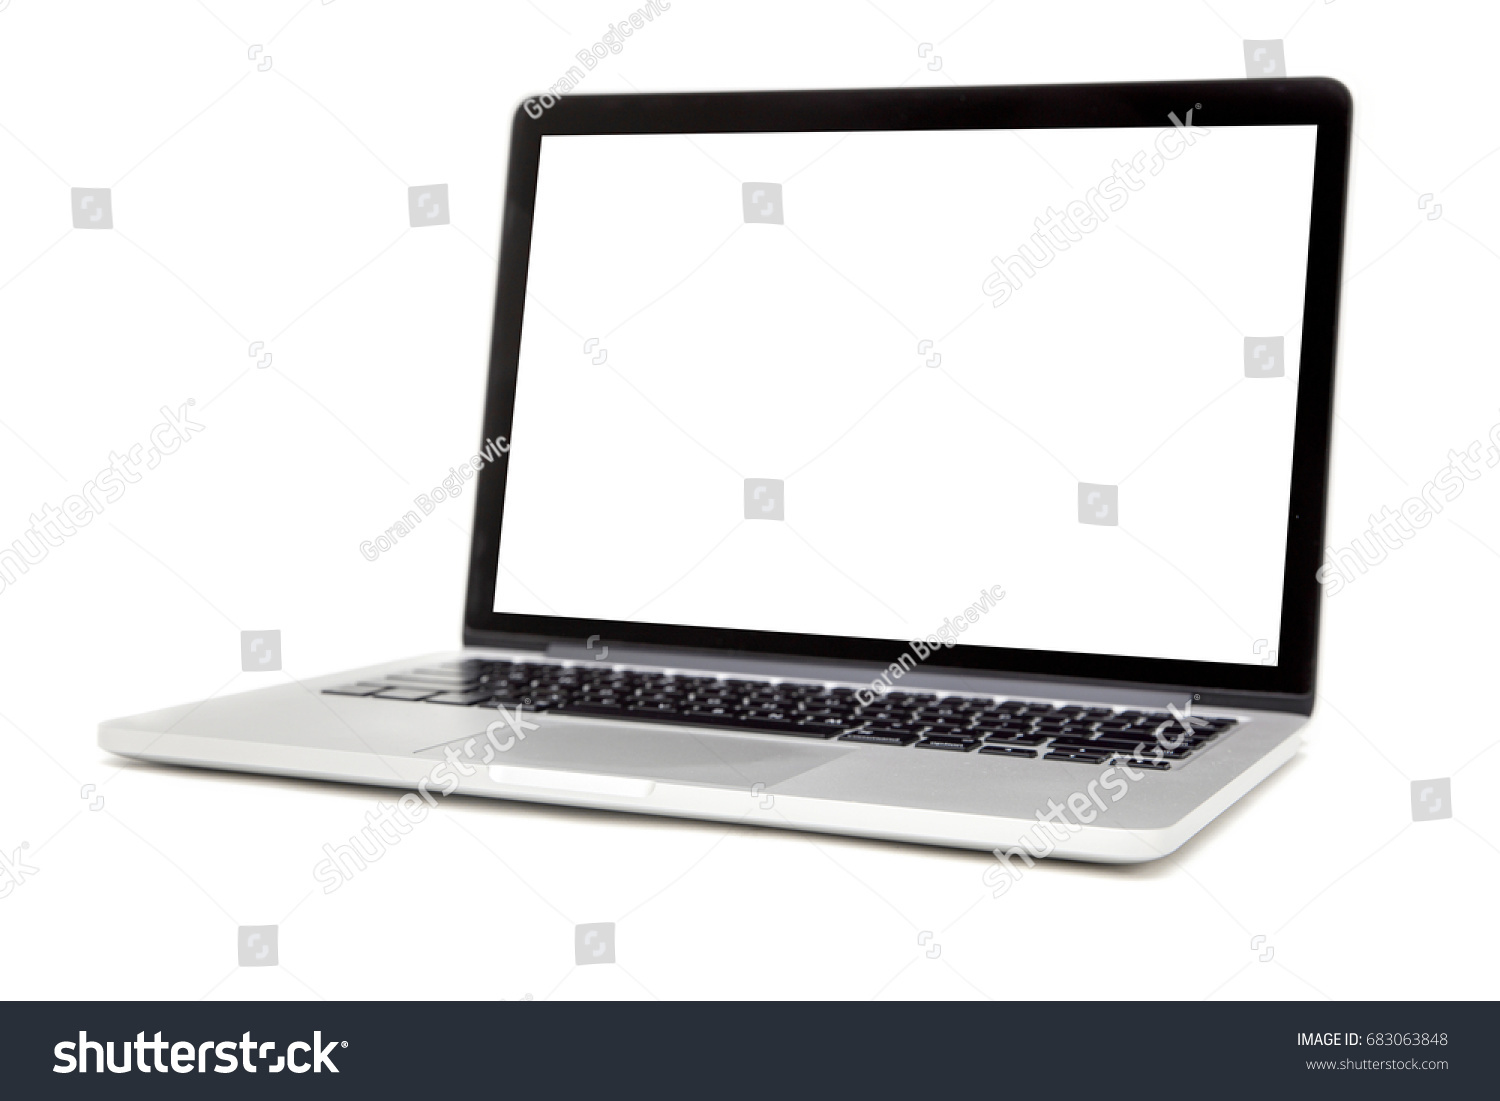 Modern laptop isolated on the white background #683063848